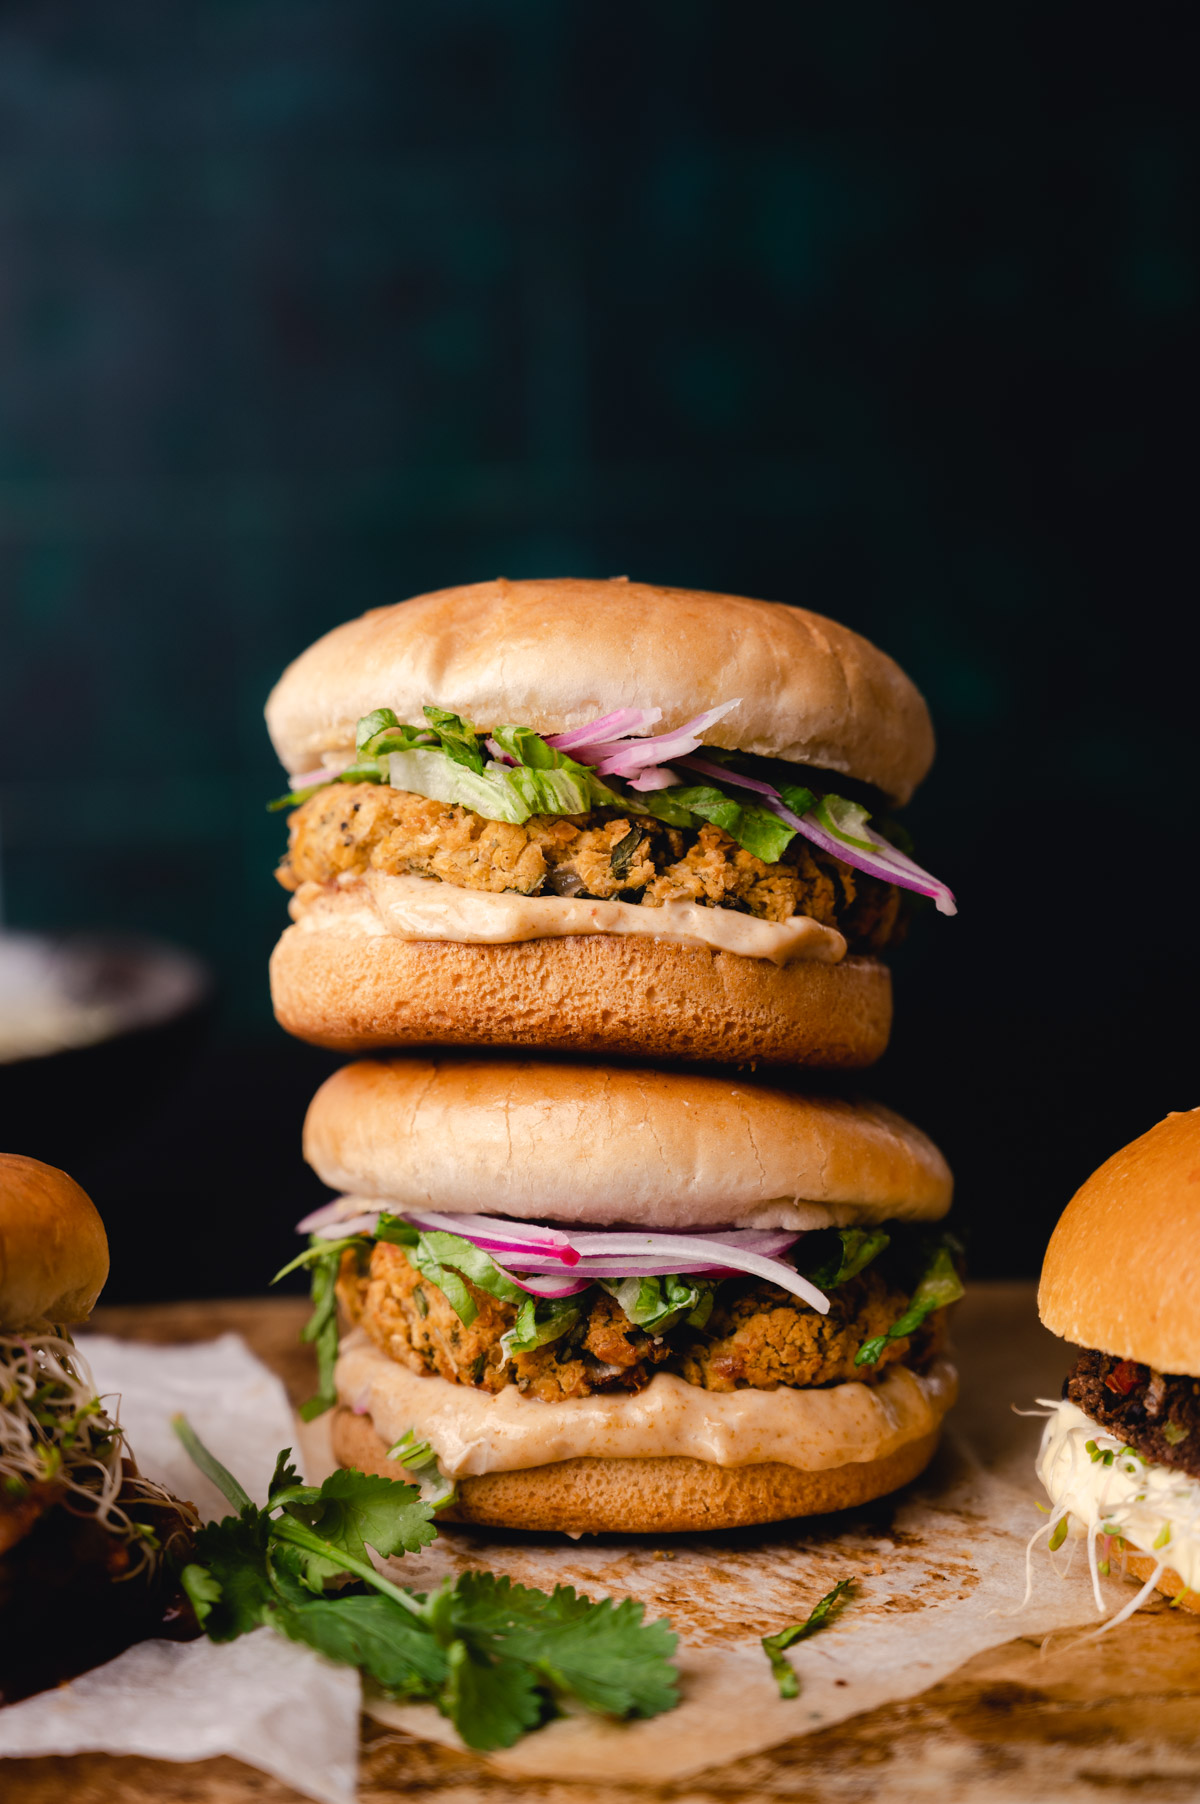 Three stacked chicken sandwiches with pickled red onions and cilantro, served on a rustic wooden surface.